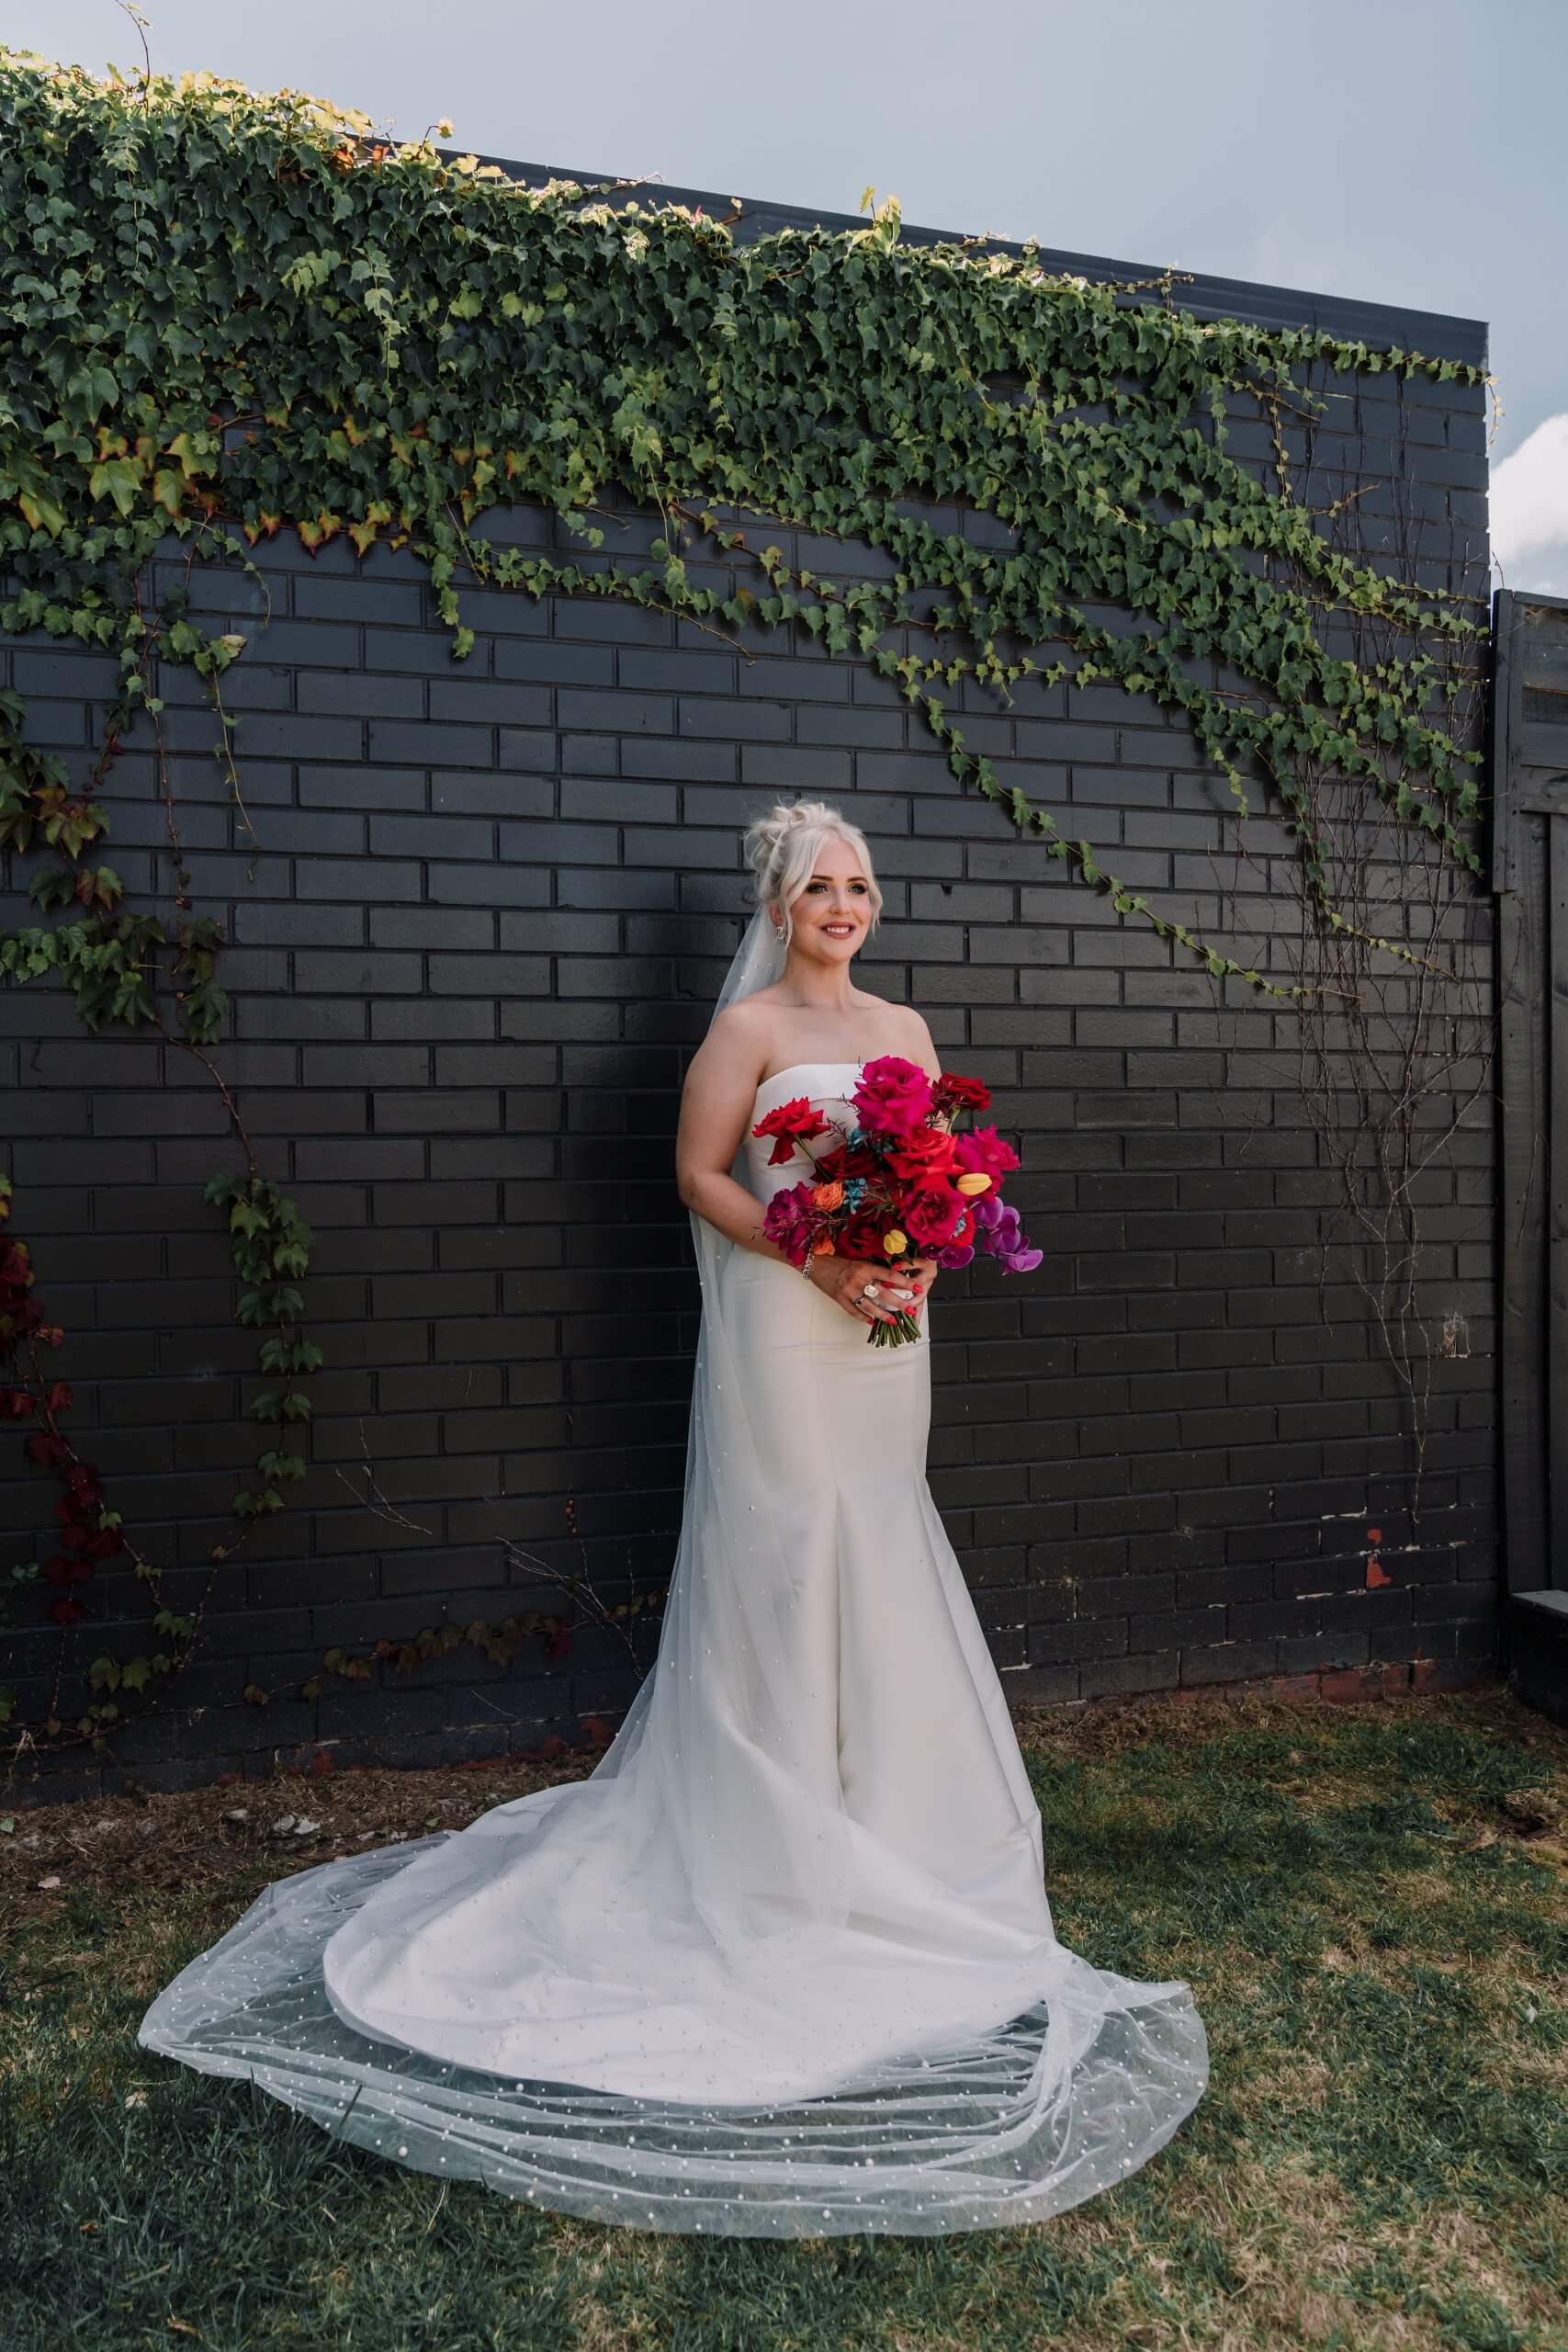 Bride showcases her full wedding gown while holding her beautiful bouquet of bright red and pink roses.